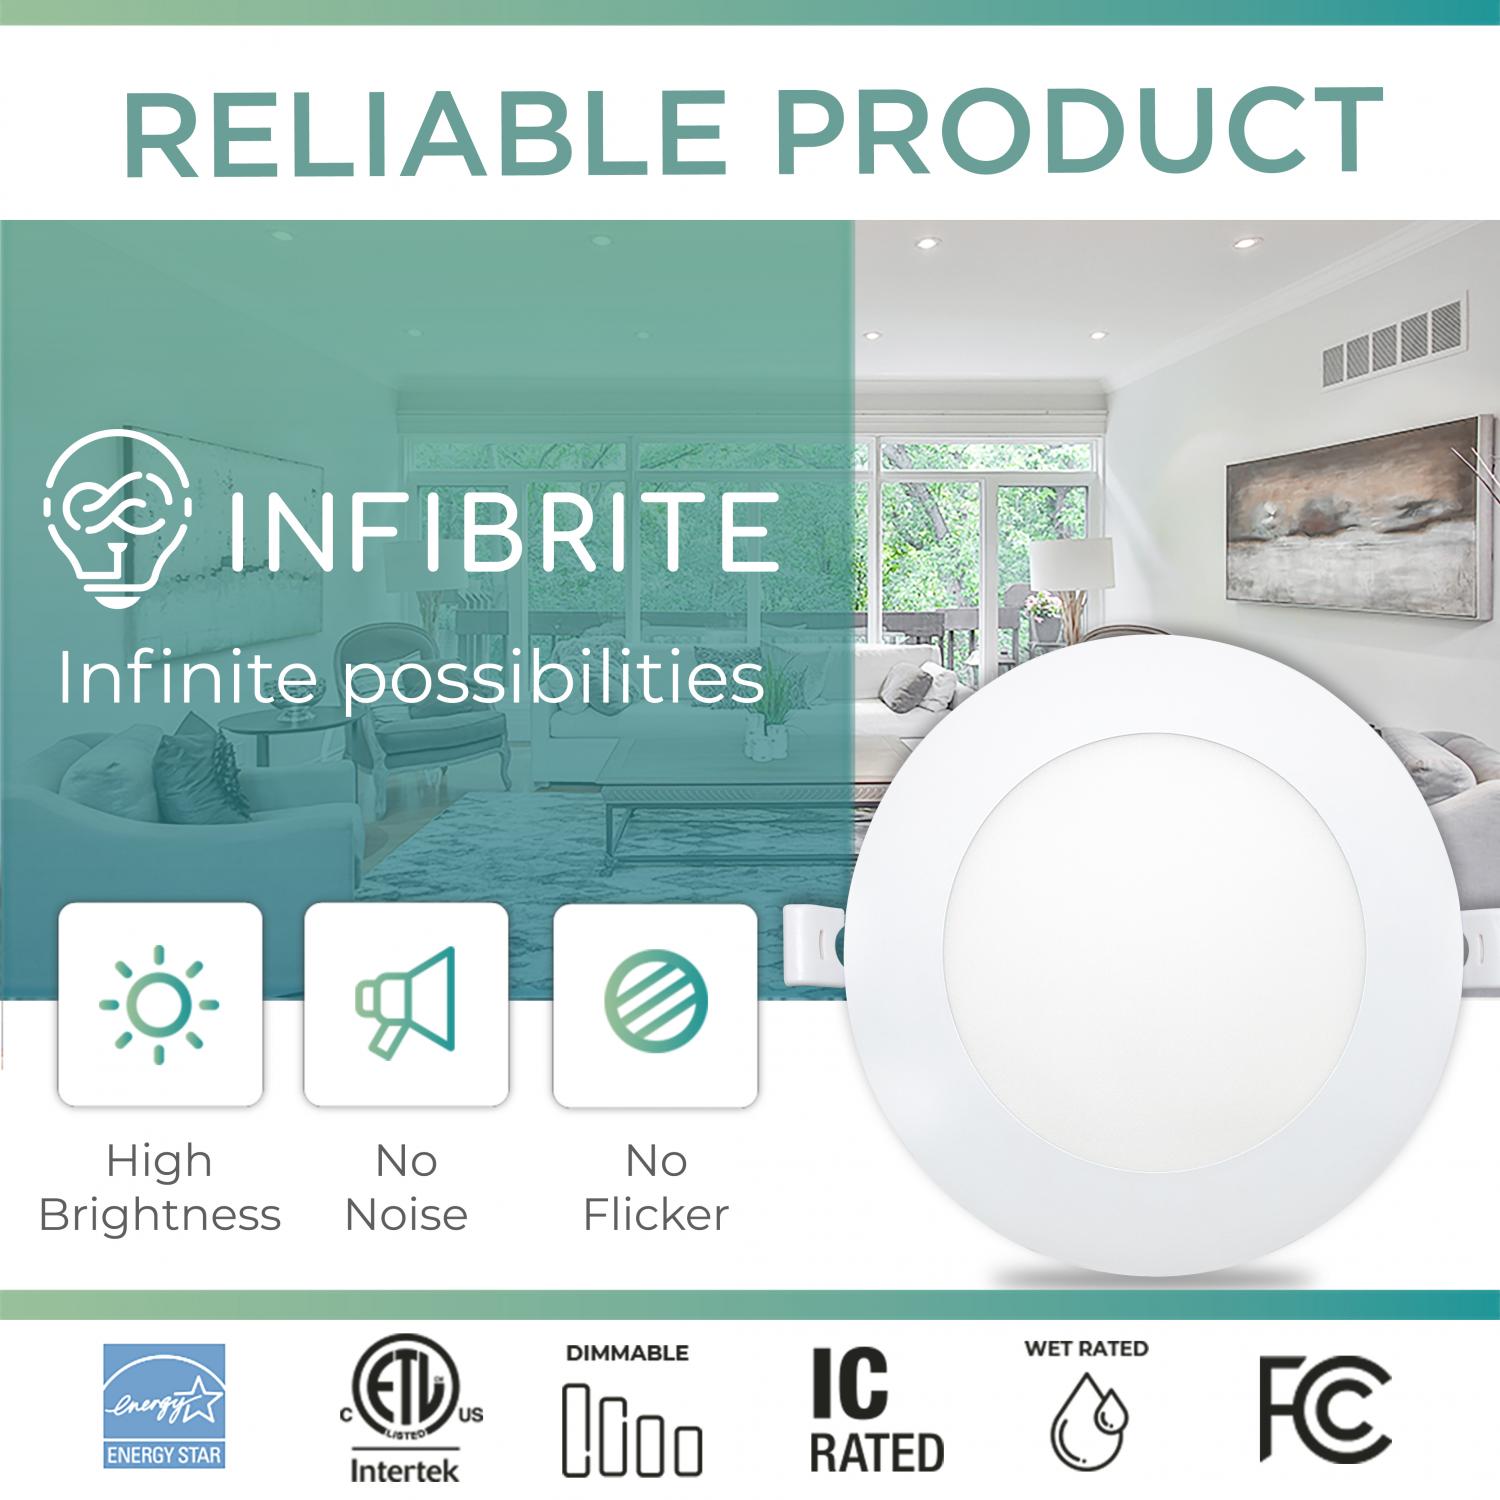 Infibrite 6 Inch 6000K Clear White 12W 1050LM Ultra-Slim LED Ceiling Light with Junction Box, Flush Mount, Dimmable, Fixture for Bedroom, Wet Rated for Bathroom, Easy Install, 110W Eqv, ETL & Energy Star, US Company (24 Pack)